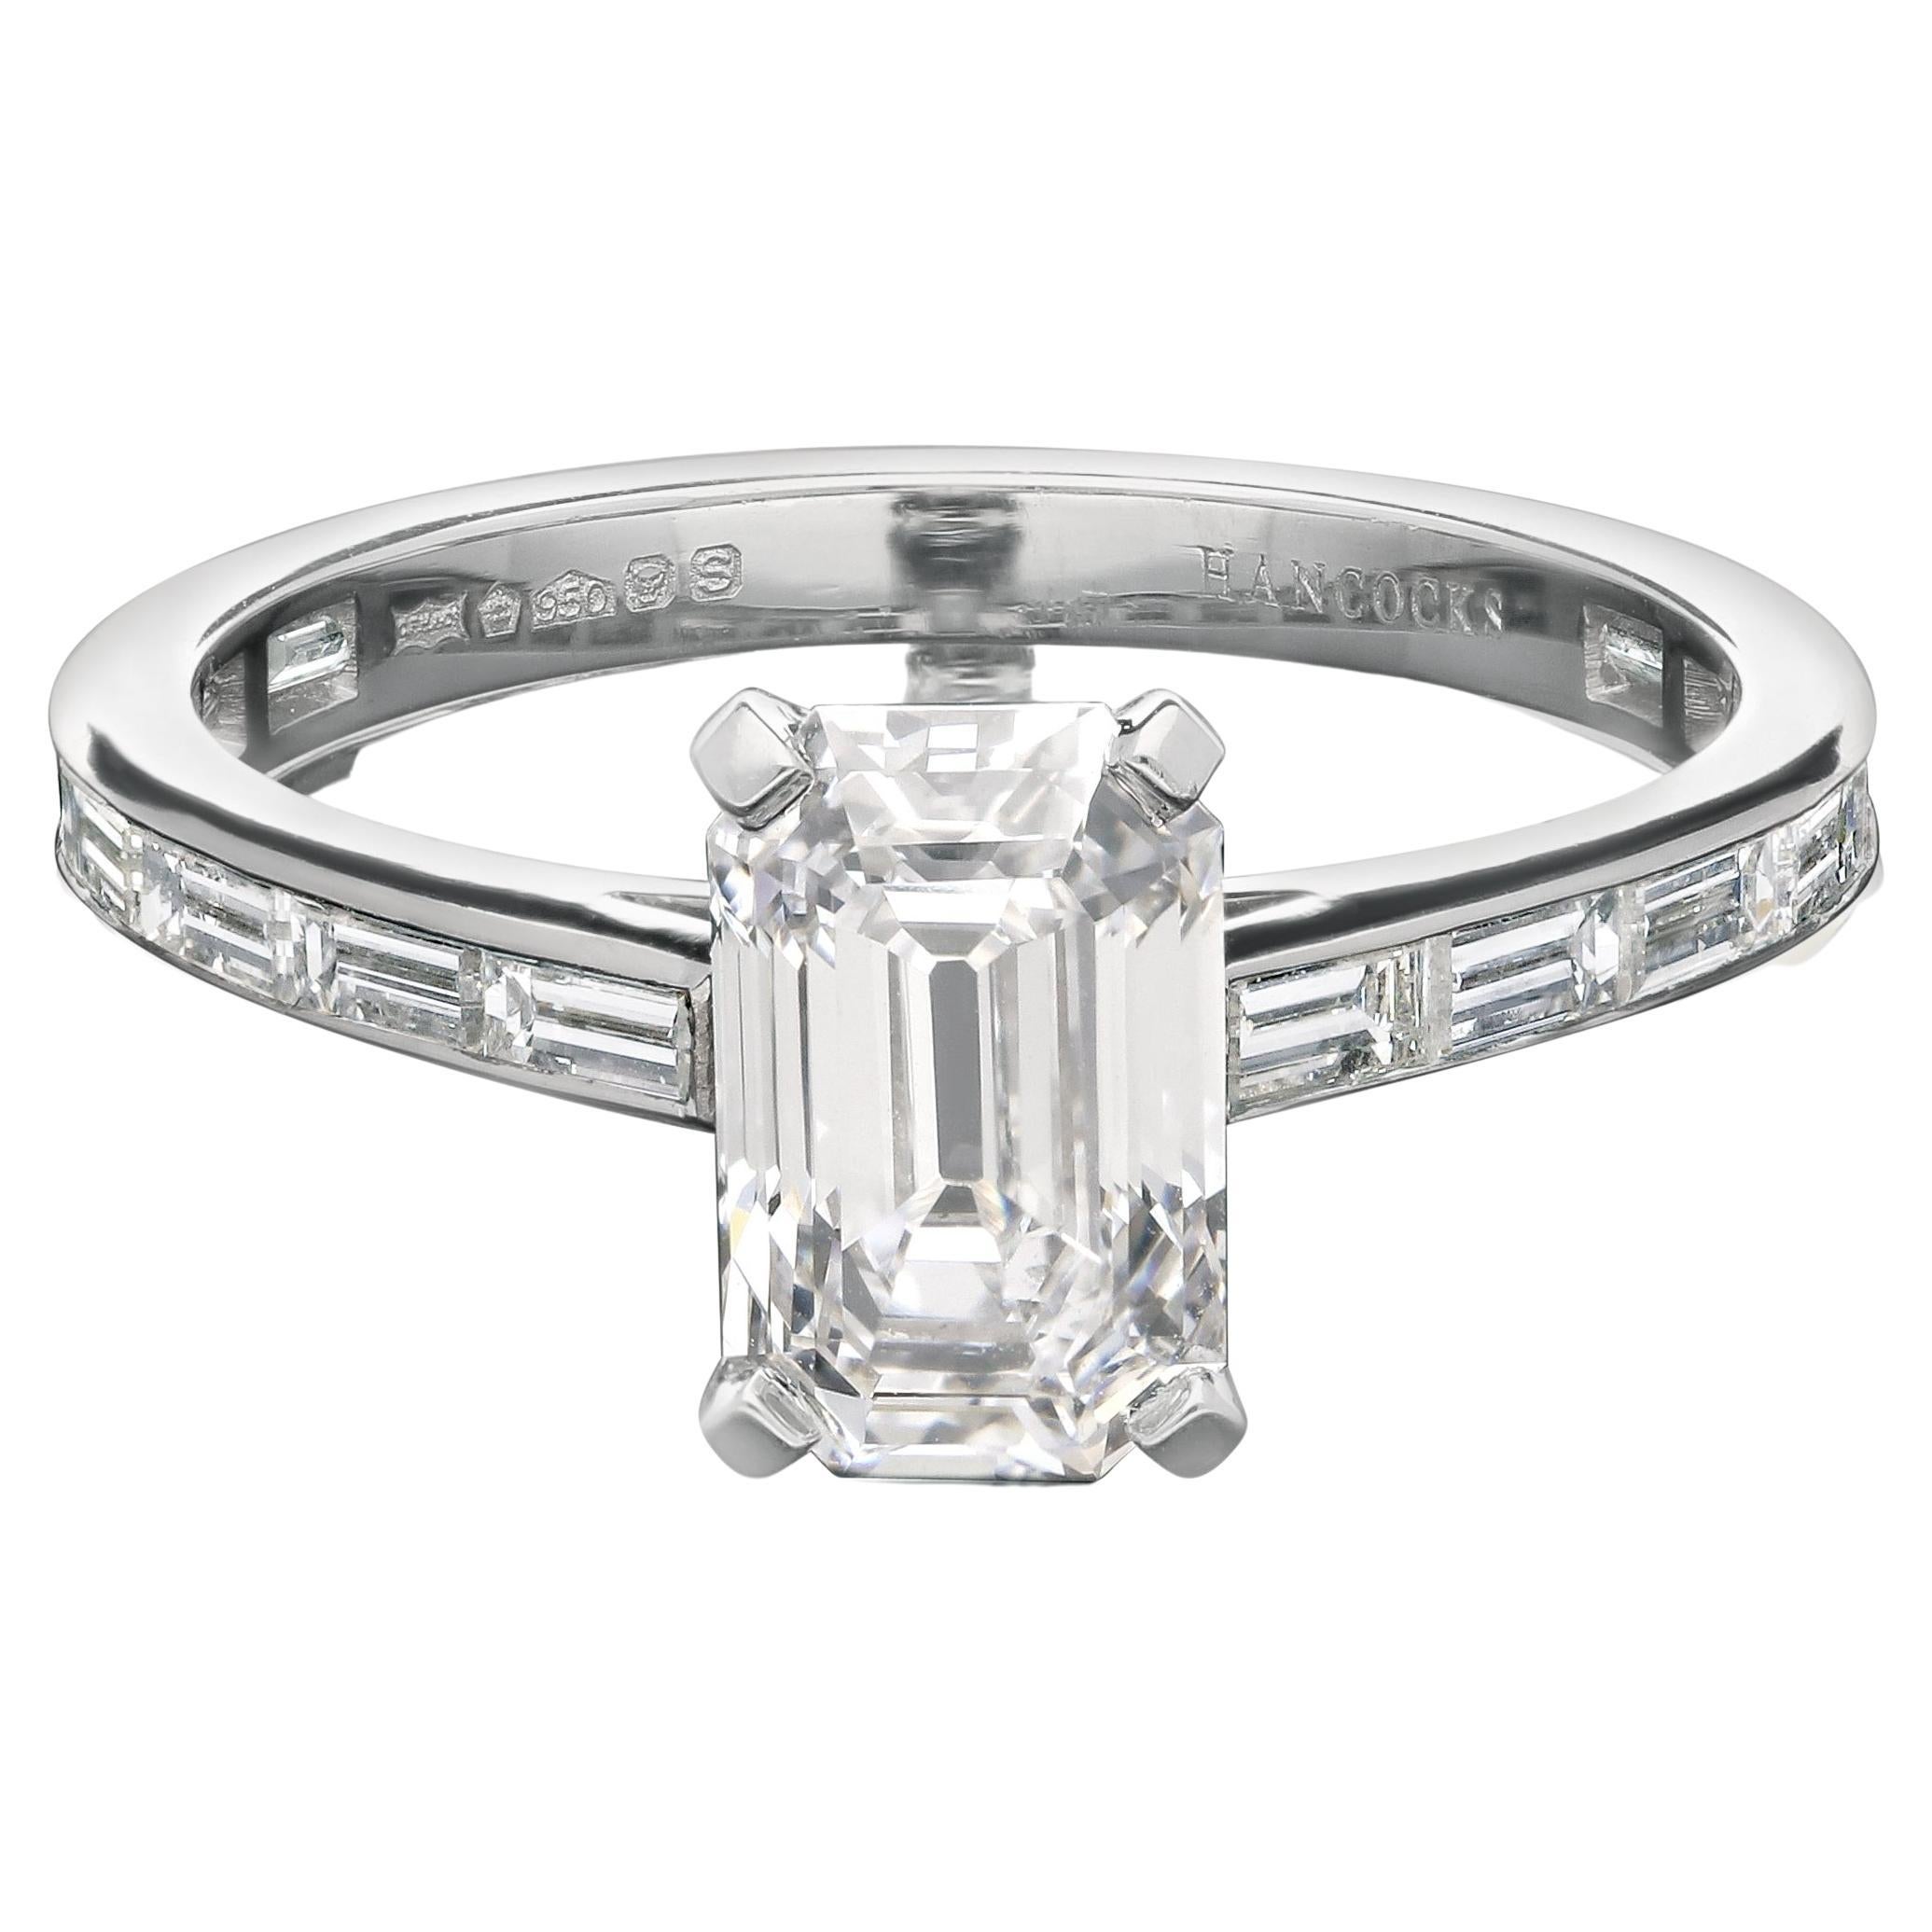 Hancocks 1.52ct Emerald-Cut Diamond Solitaire Ring With Baguette Diamond Band